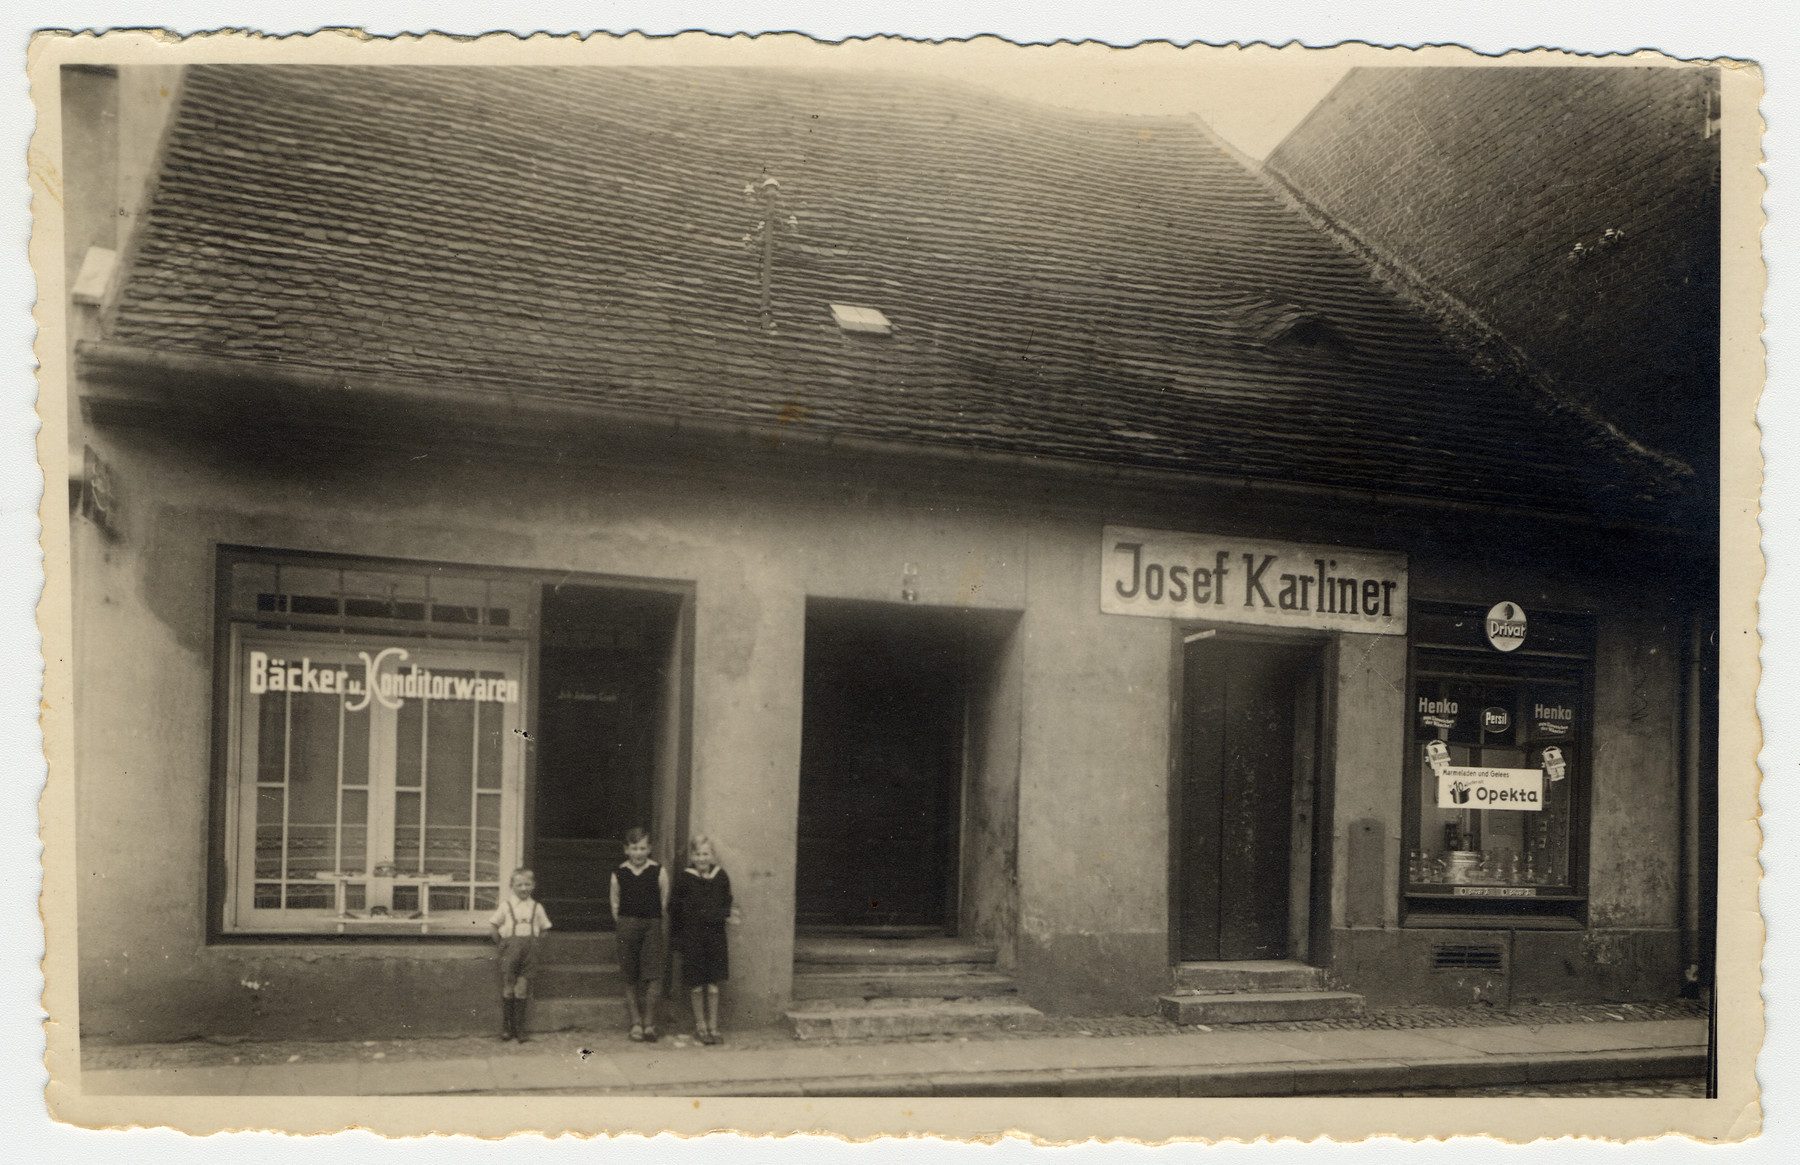 Three children pose outside the Josef Karliner grocery store.

[Pictured are probably Herbert, Walter and Ilse Karliner, the children of the store owner.]